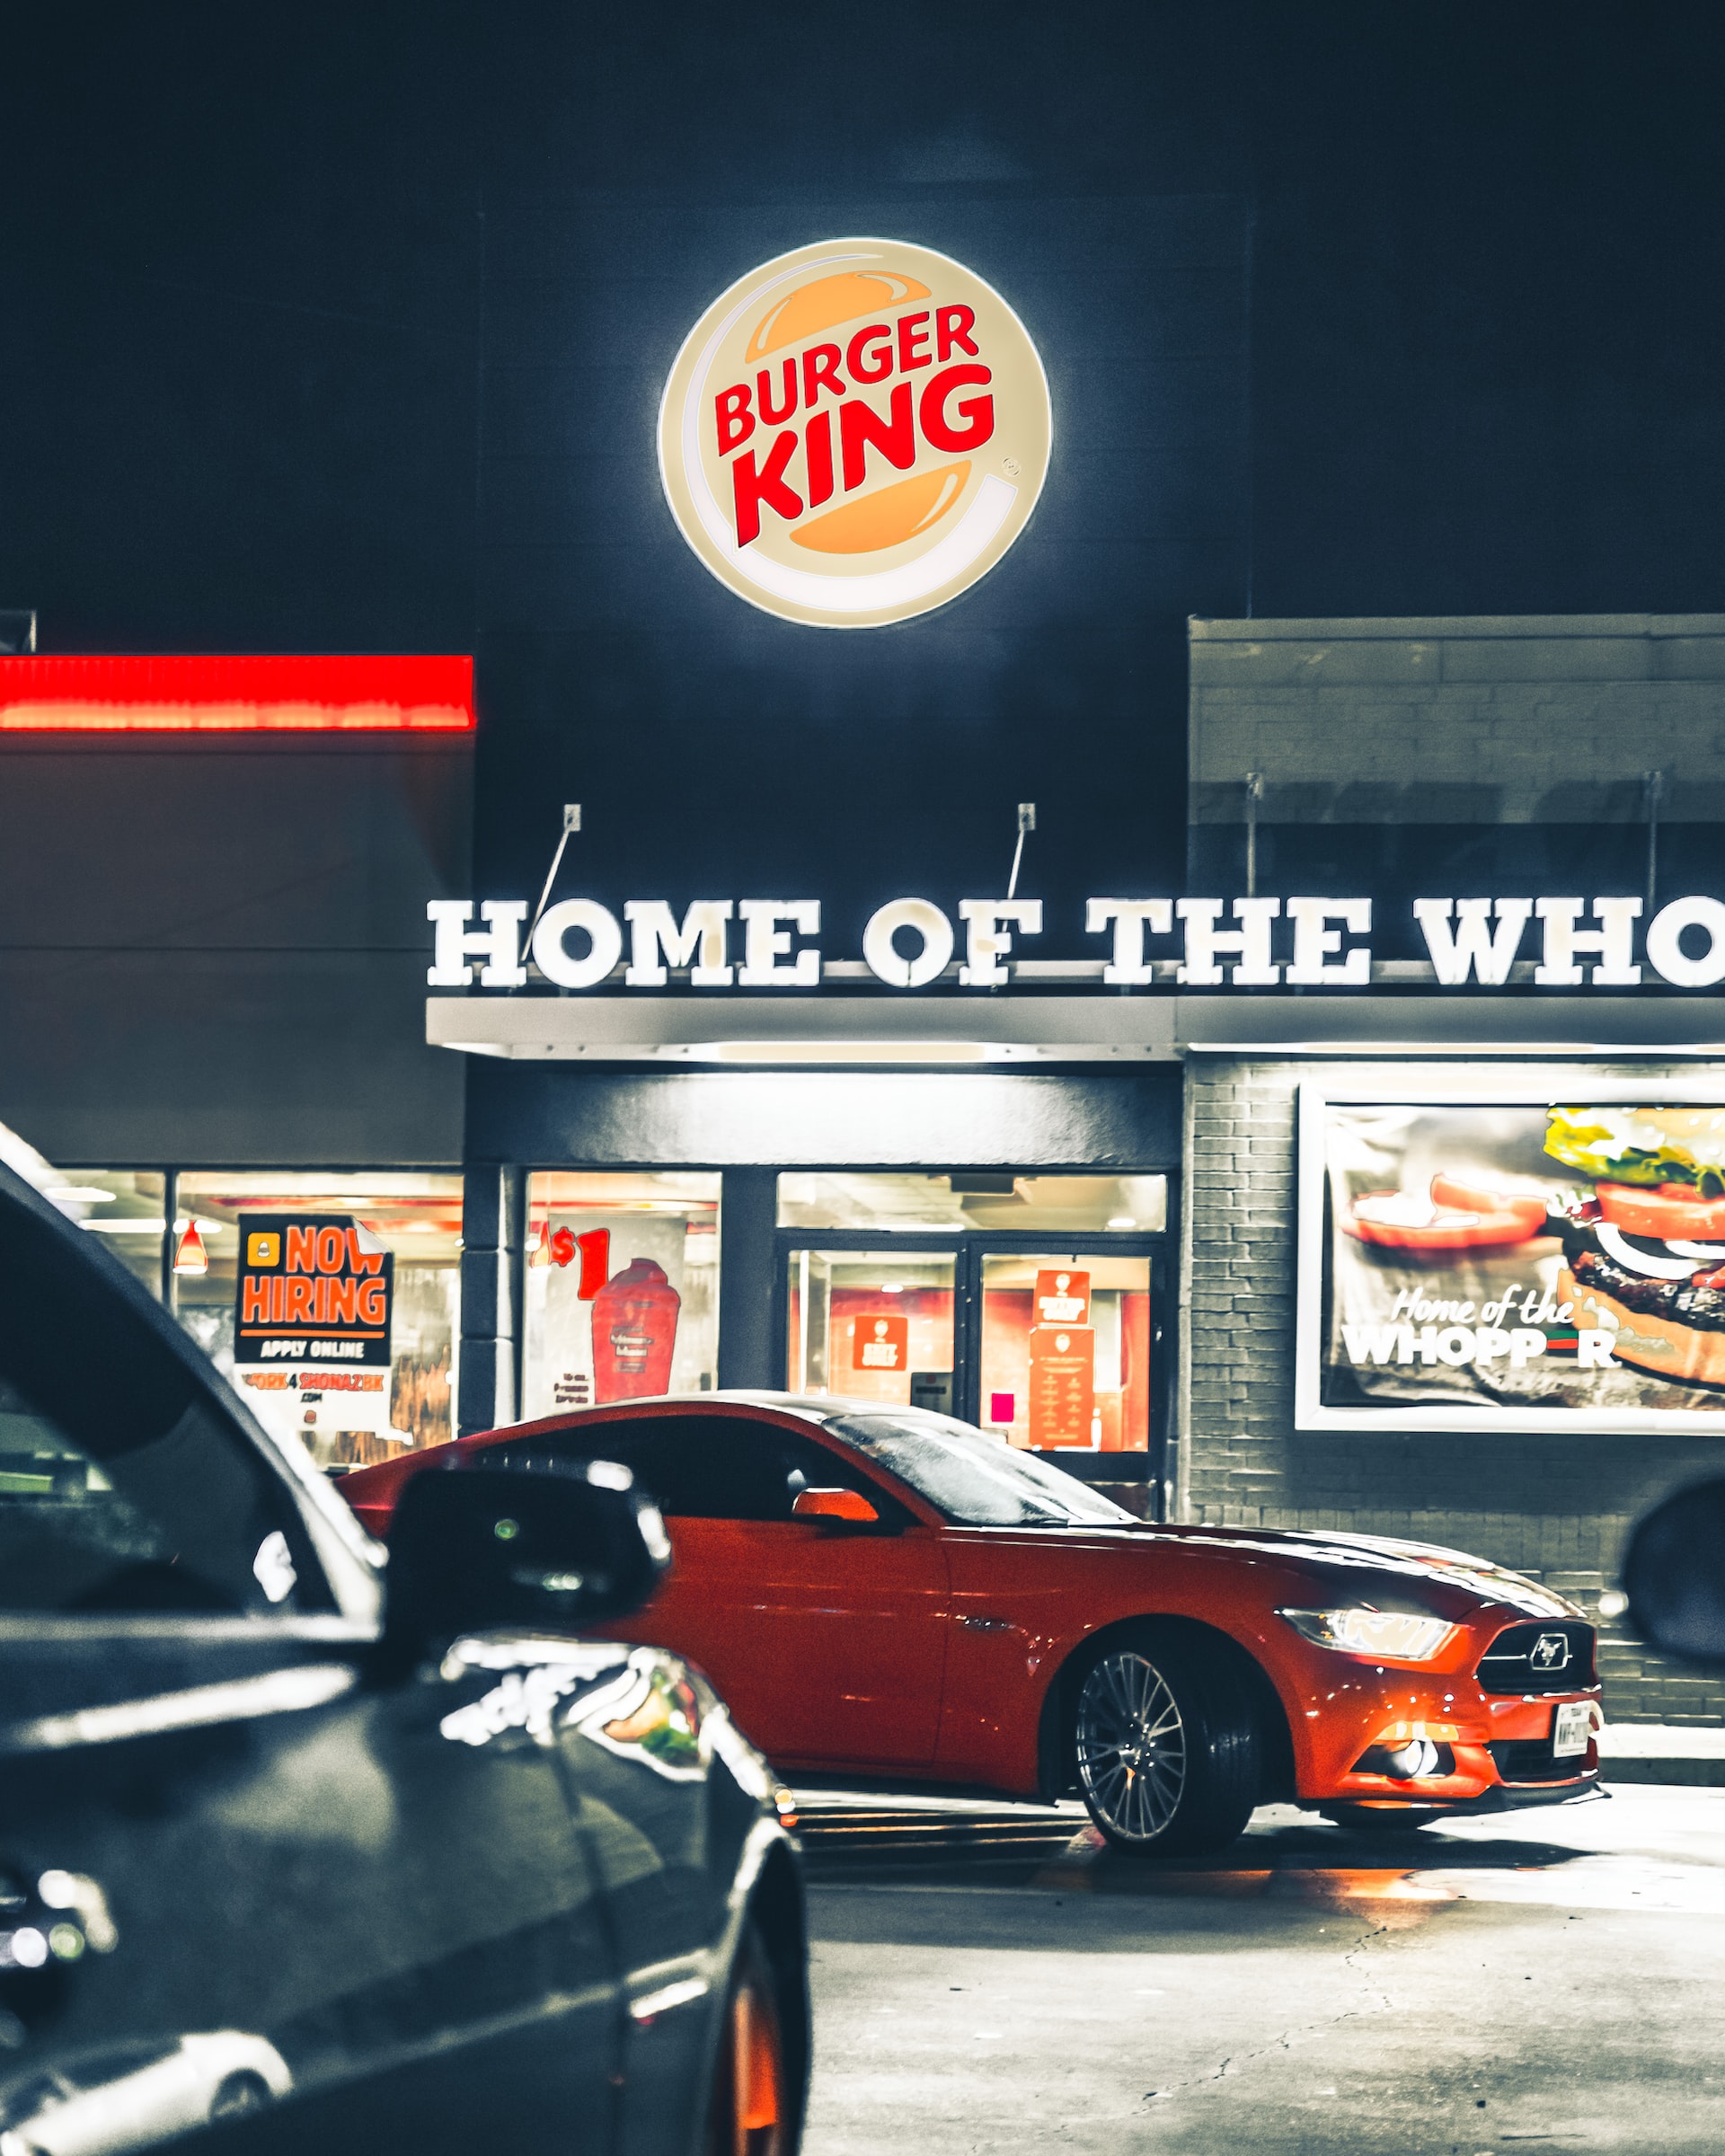 Dodge car in front of a burger king shop